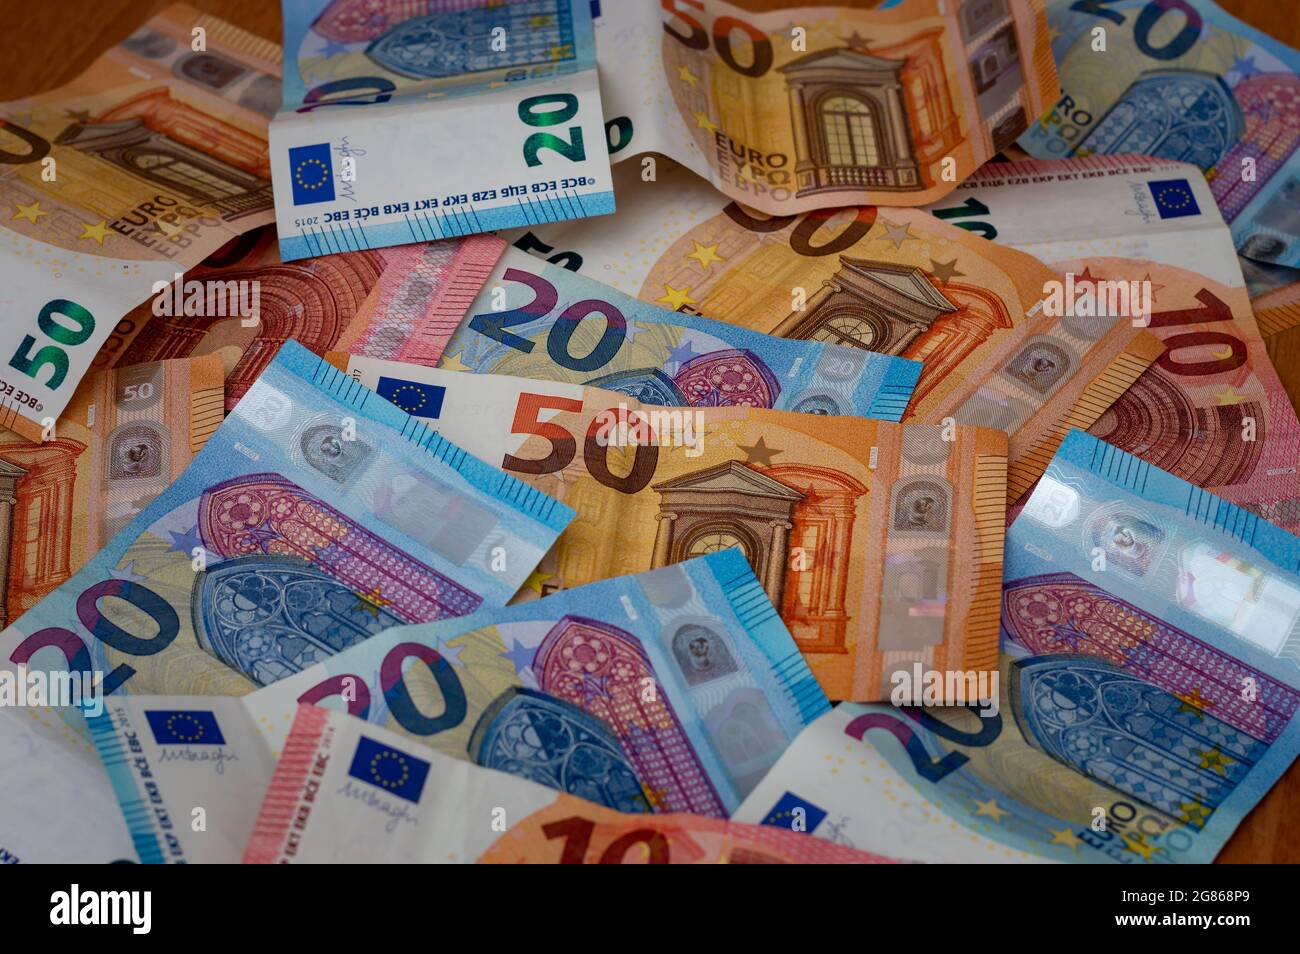 European banknotes of 50, 20 and 10 euros european currency Stock Photo